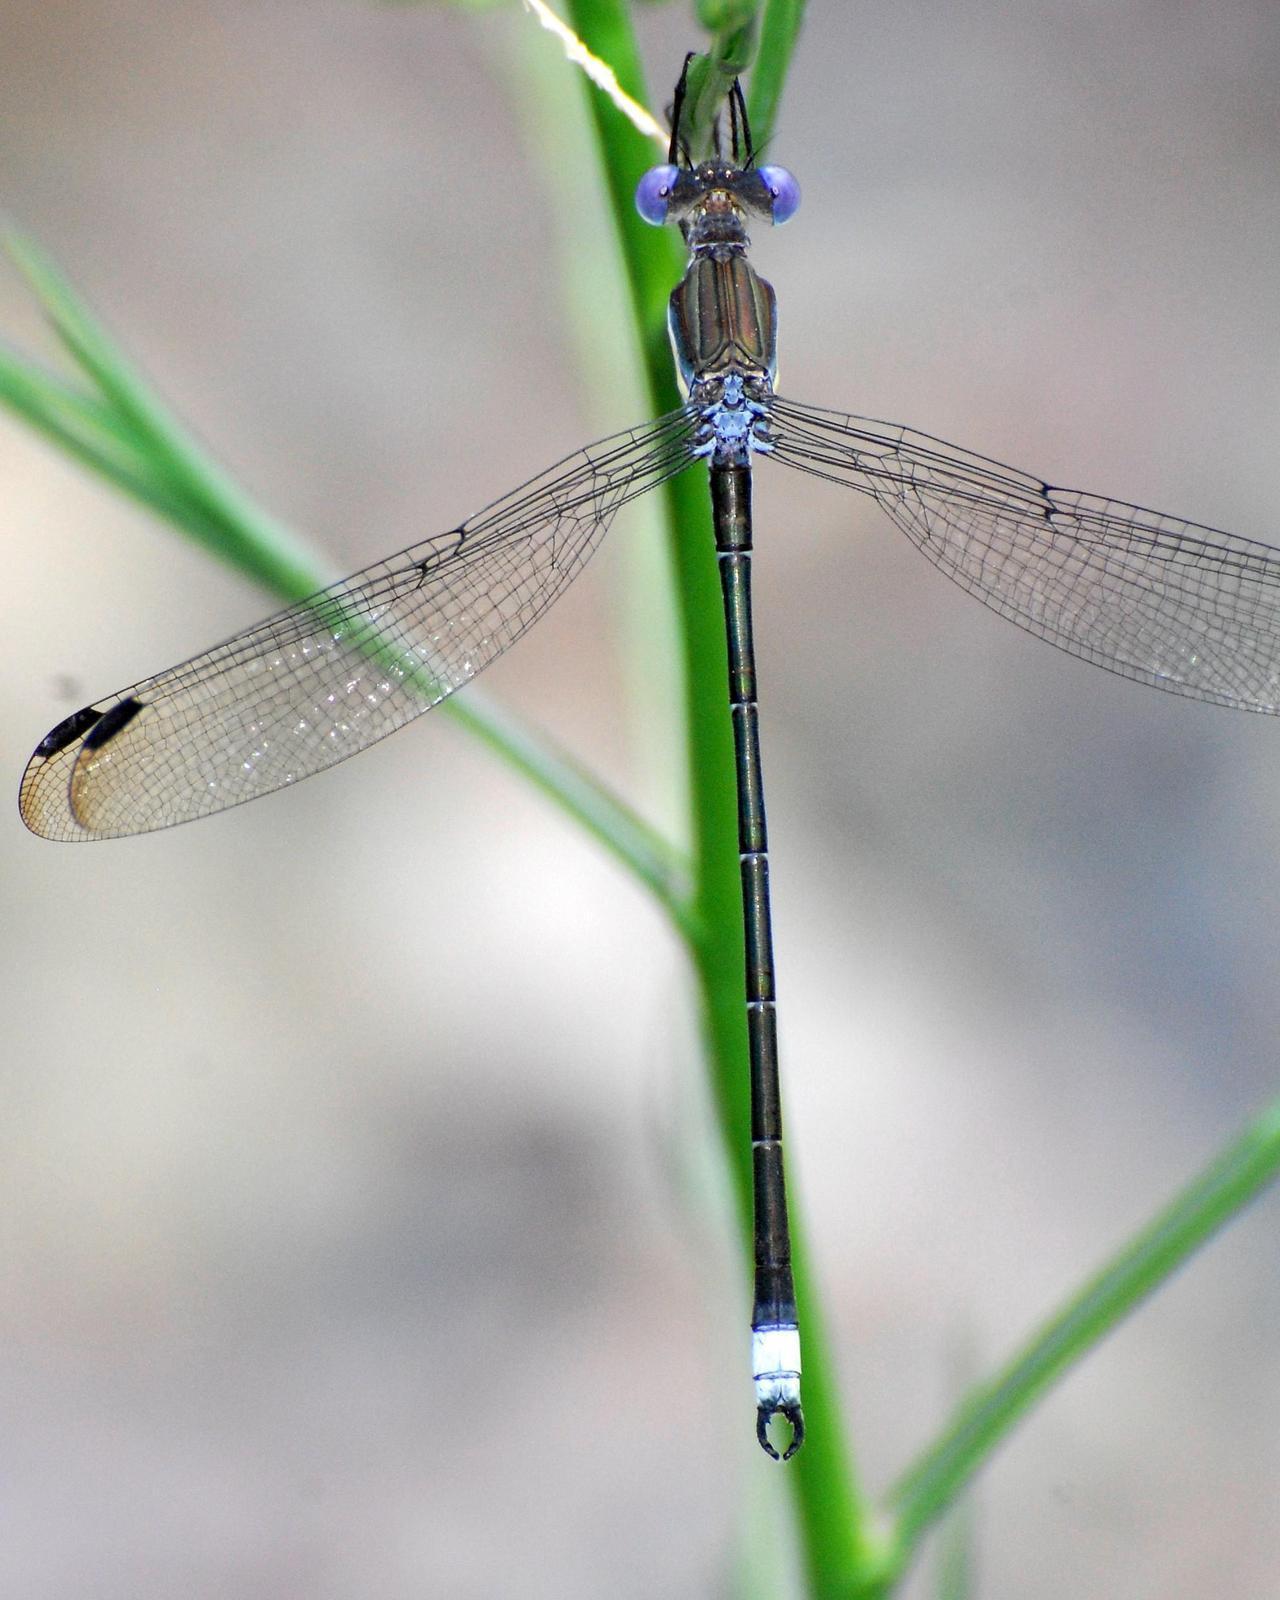 Great Spreadwing Photo by David Hollie